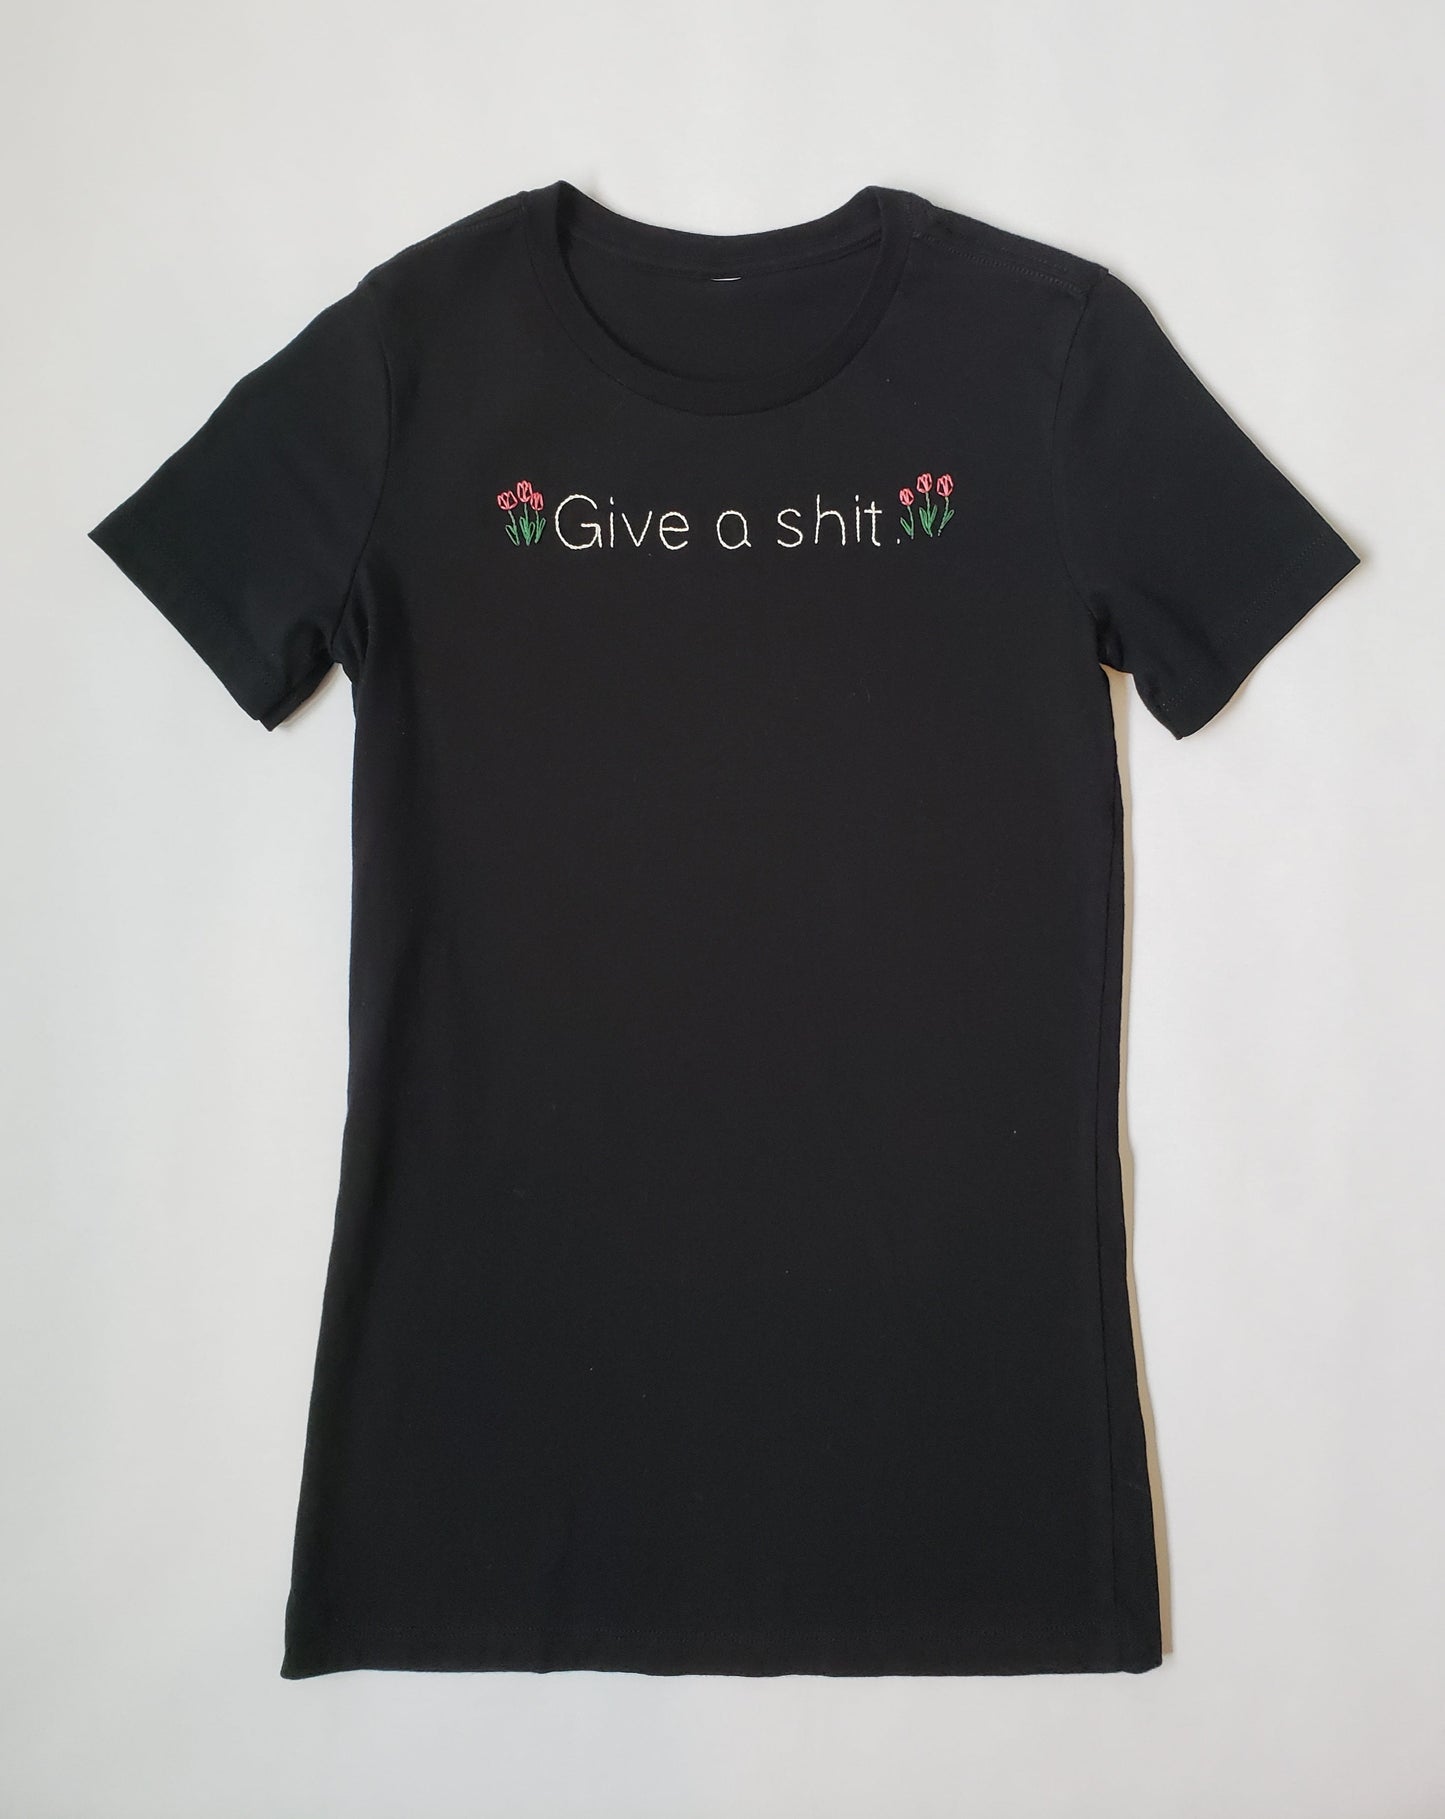 A slim fit black crew neck tee with "Give a shit" hand embroidered in white, in a font similar to Helvetica. Three tulips are on either side of the text. The tulips are gathered together like they are planted alongside the text. They are a muted red.